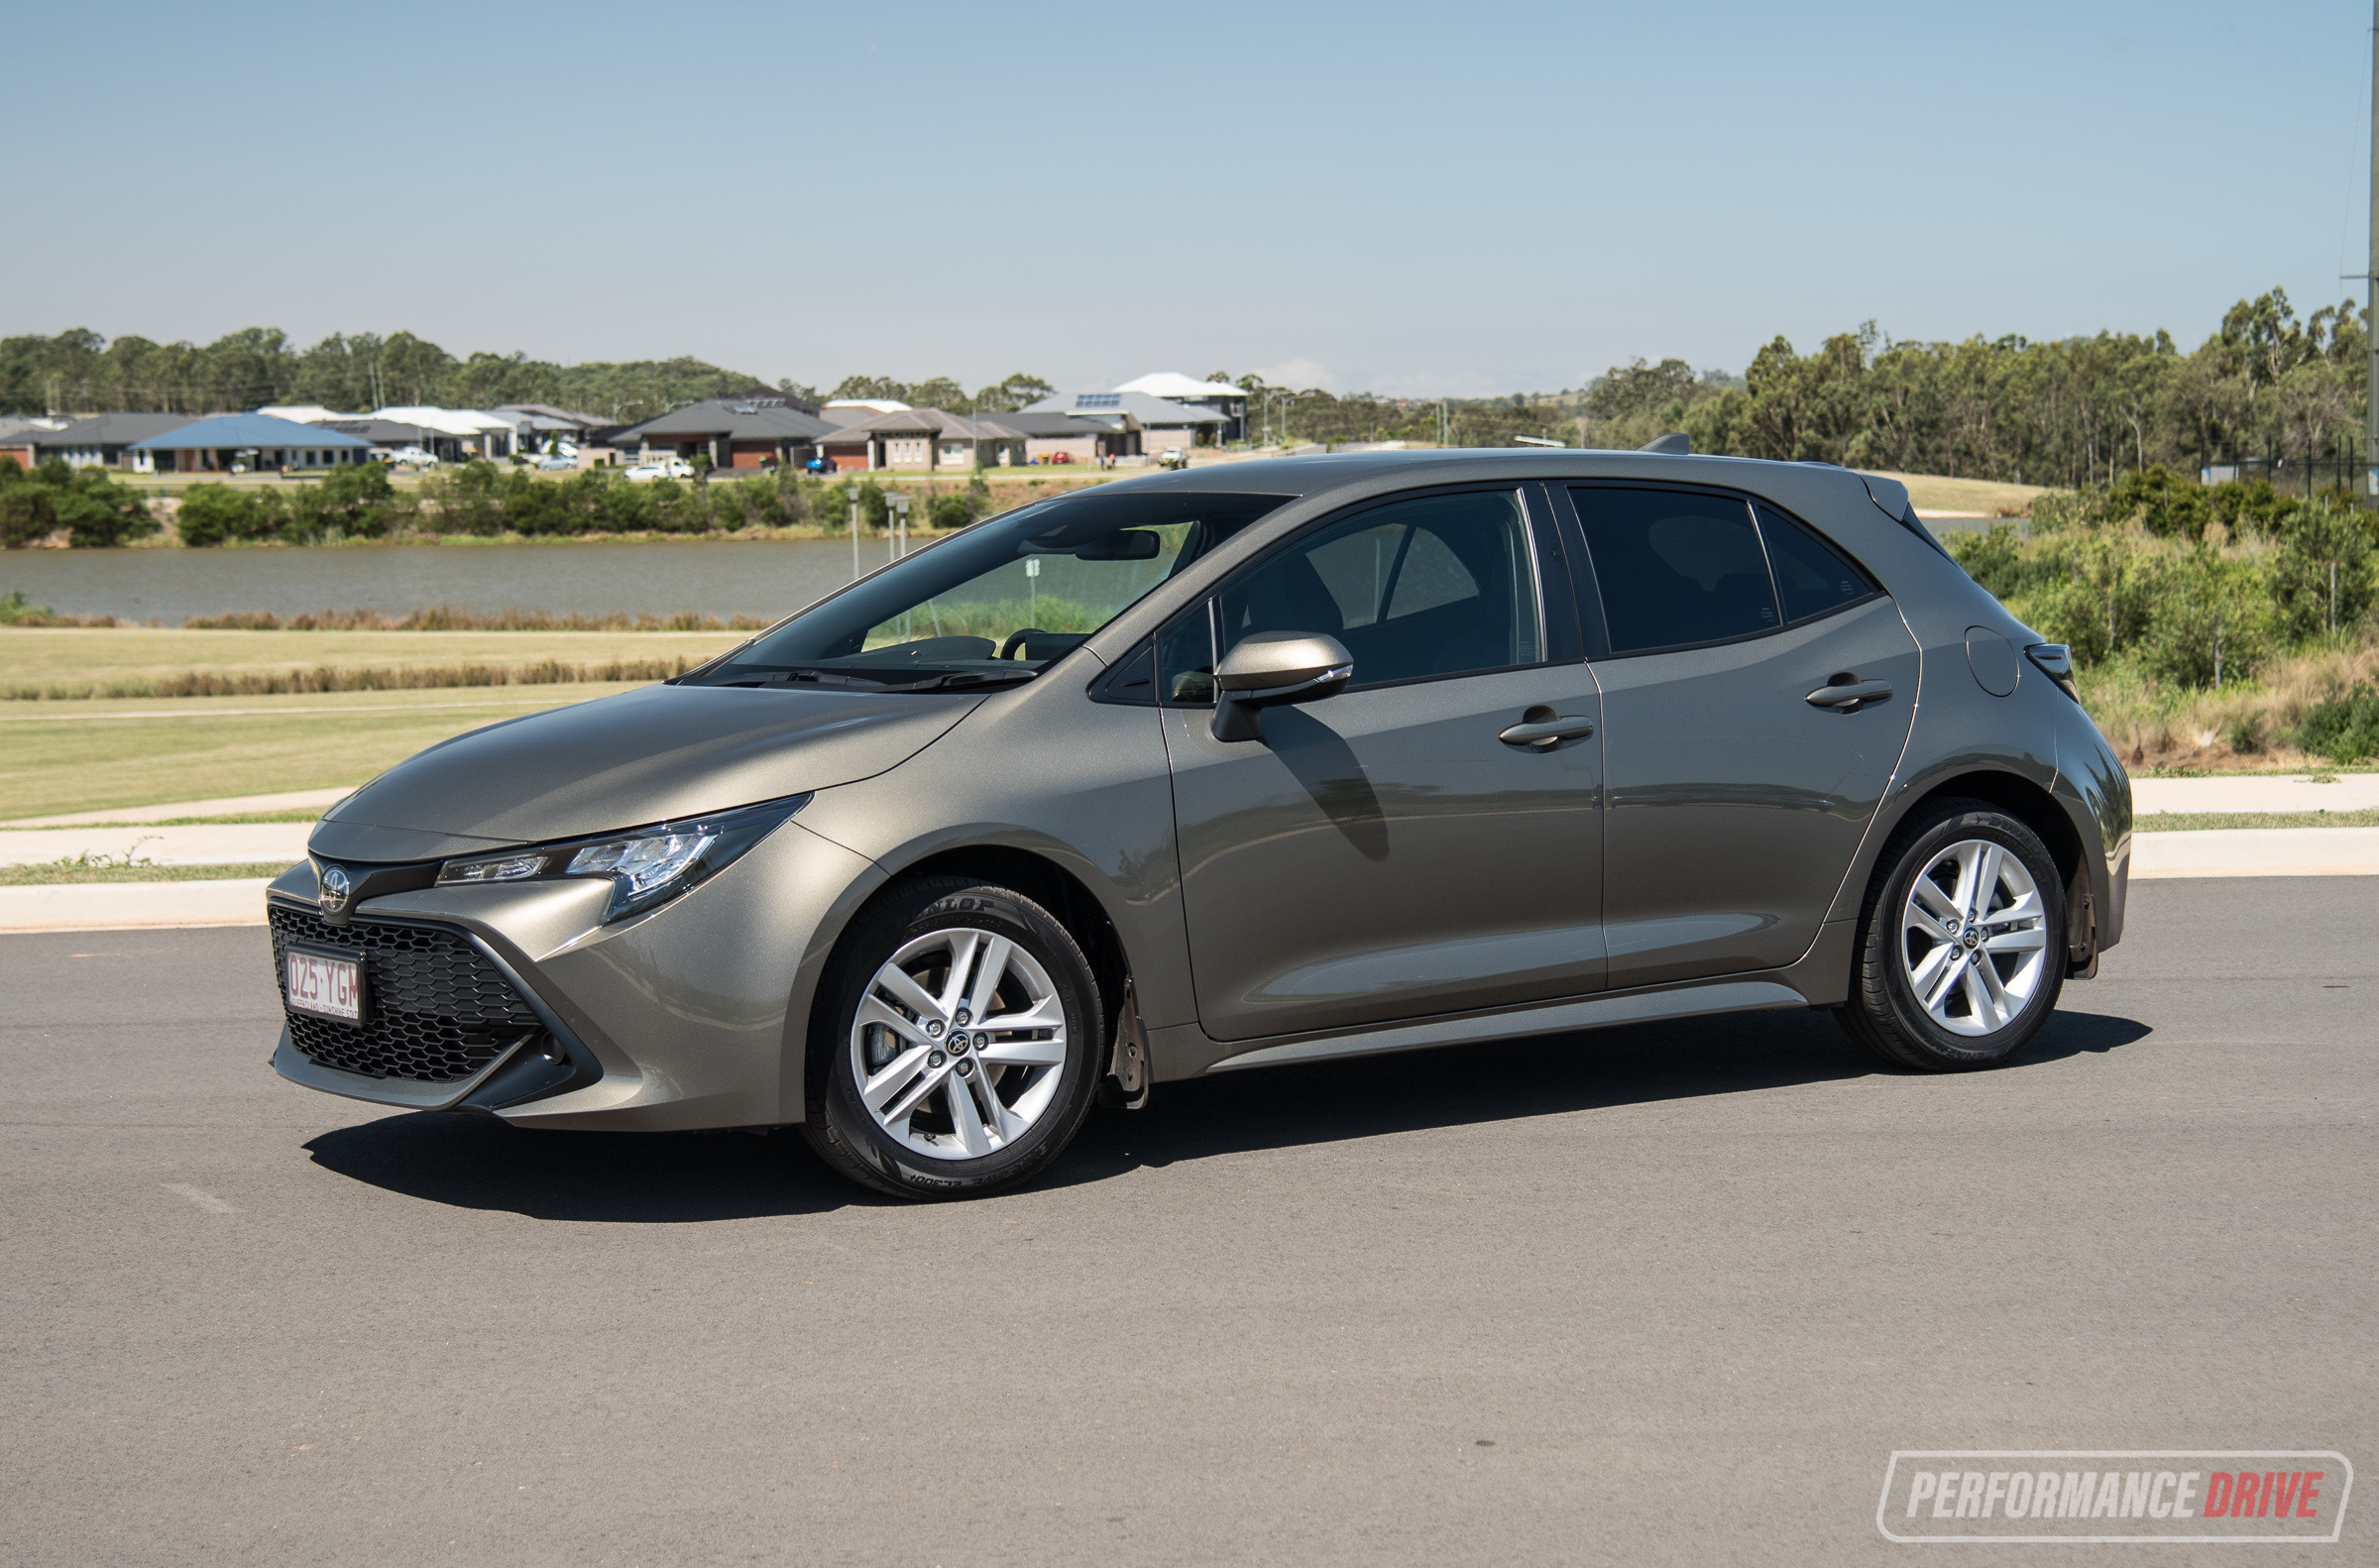 2019 Toyota Corolla Ascent Sport 2.0 petrol review – quick test (video)